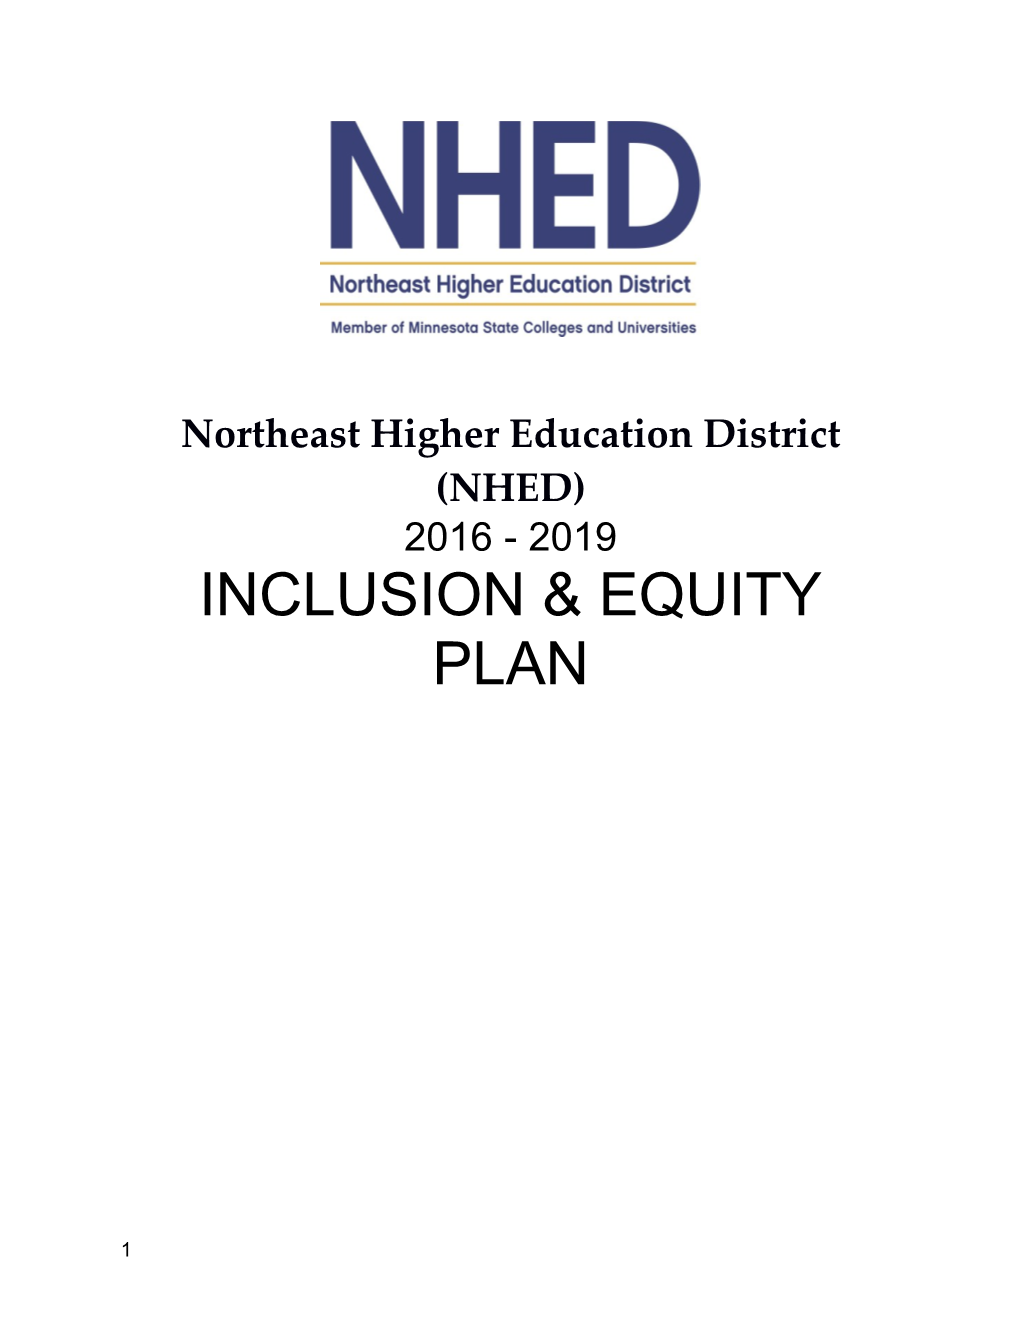 Northeast Higher Education District (NHED)